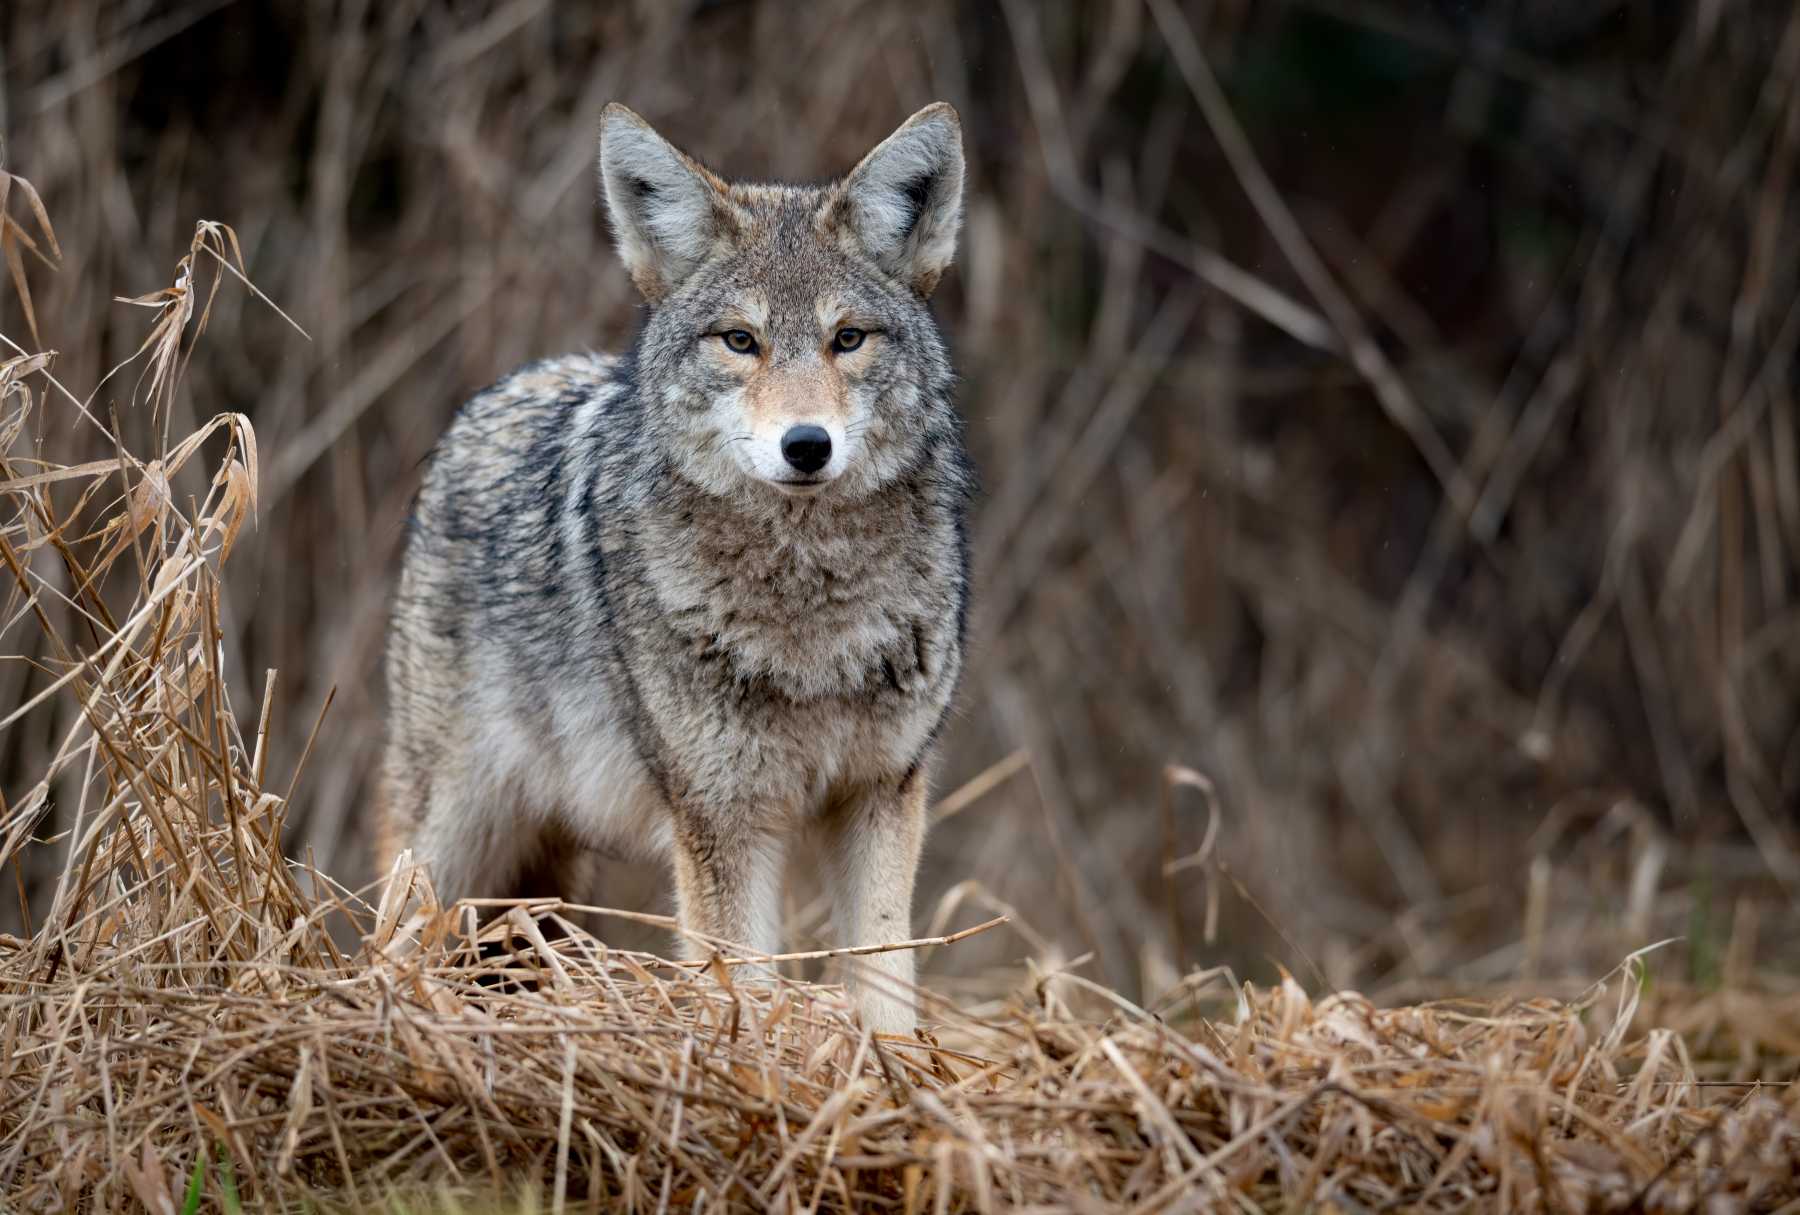 What eats coyotes?